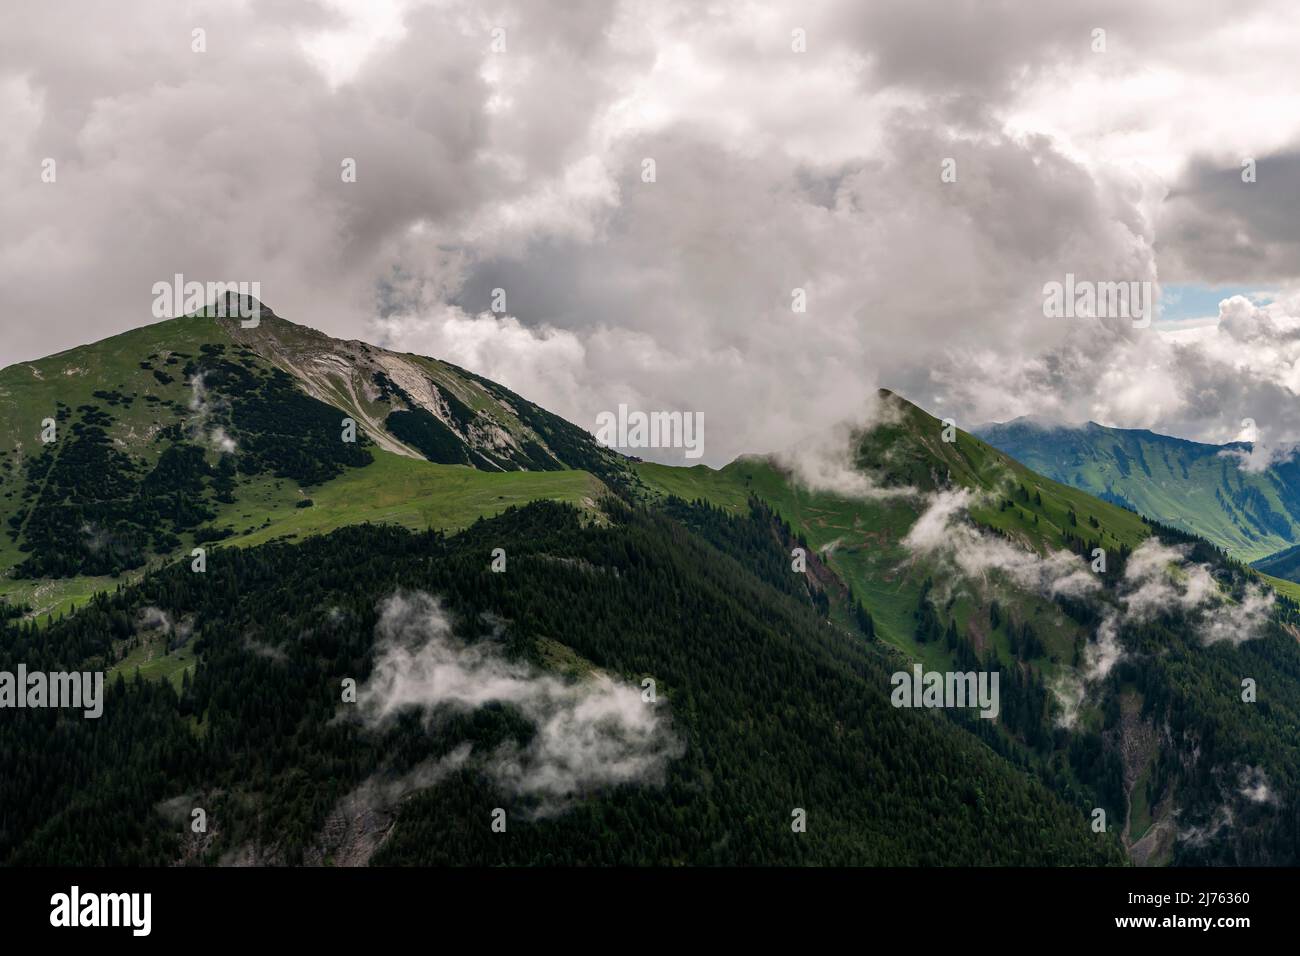 The Schafreuter, a popular mountain in the German-Austrian border area, in the Karwendel, in dense clouds and rainy weather. If you look closely, you will discover the hut in the center of the picture. Stock Photo